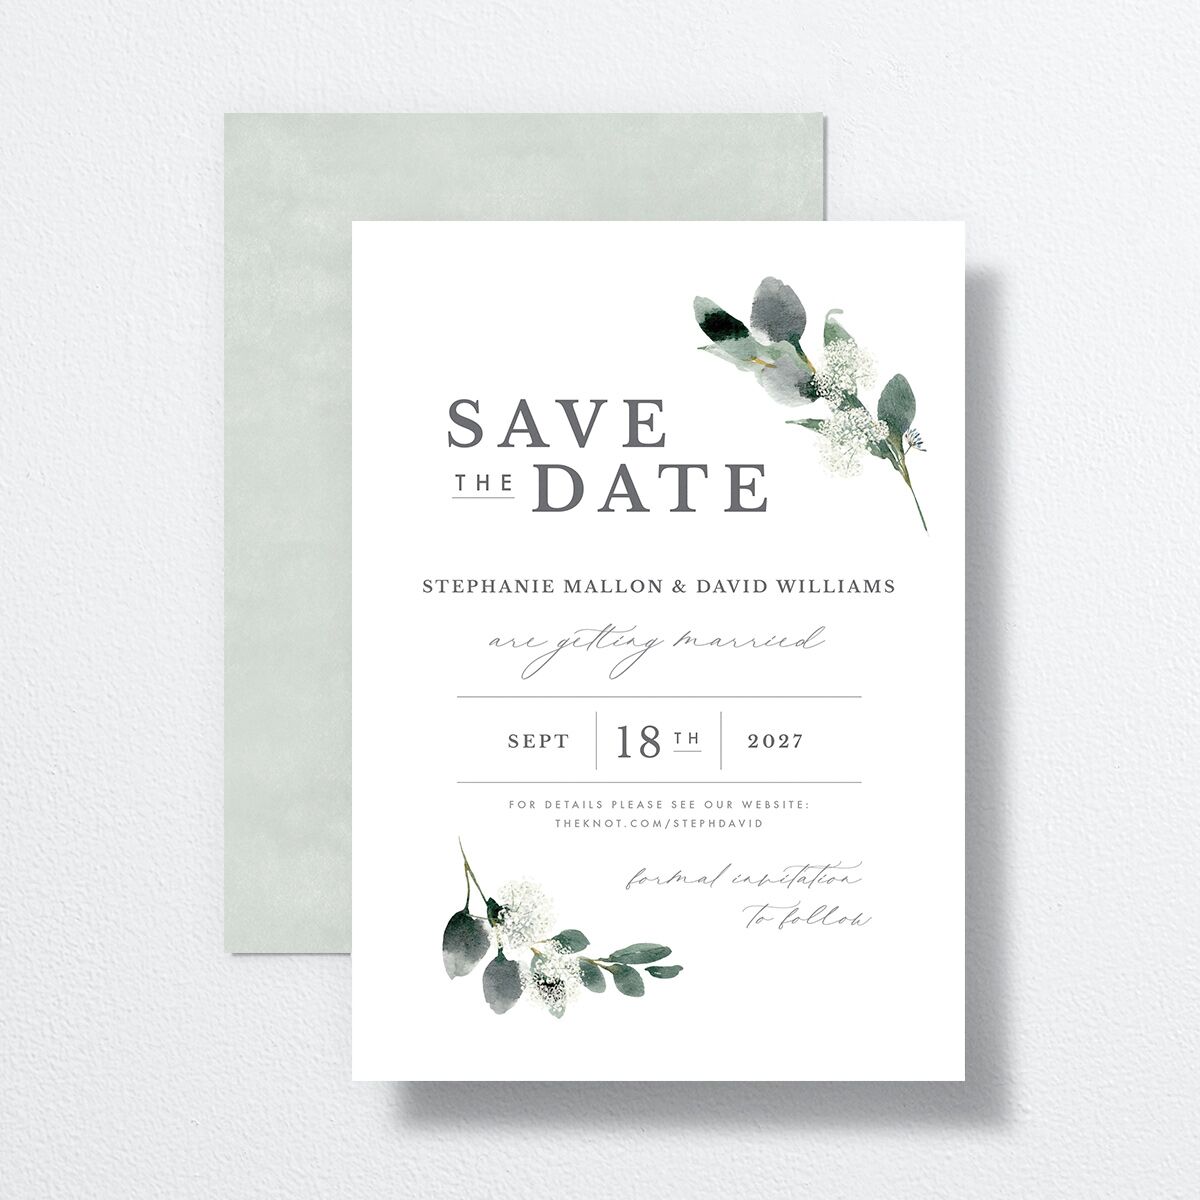 Elegant Greenery Save The Date Cards front-and-back in white